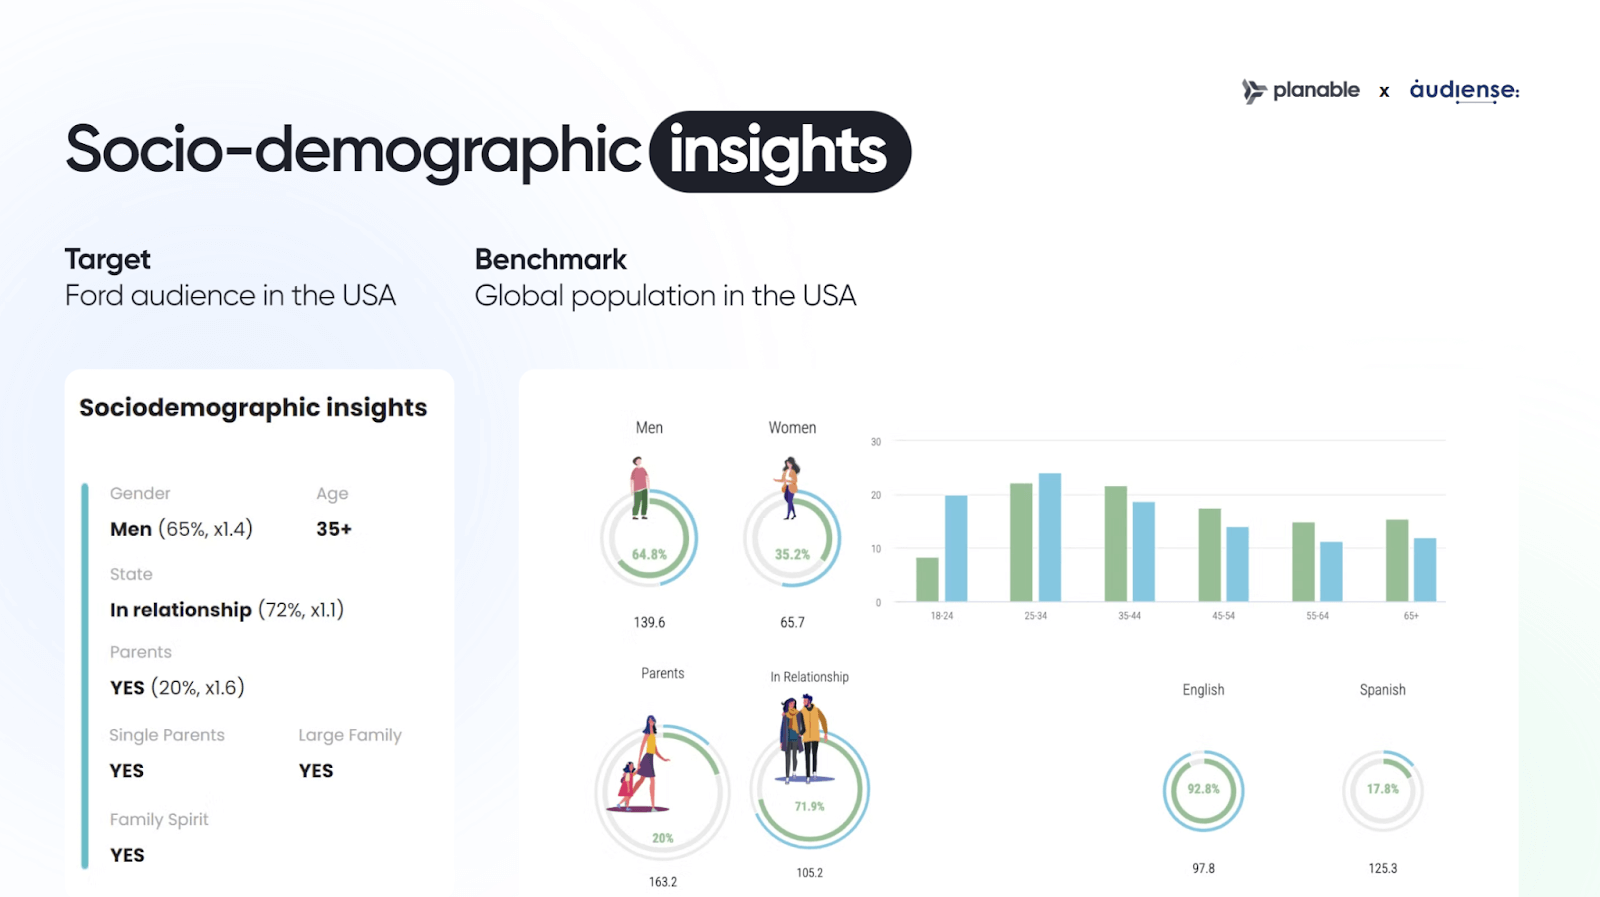 Sociodemographic insights for Ford's US audience, highlighting gender, age, relationship status, parenthood, and language demographics.